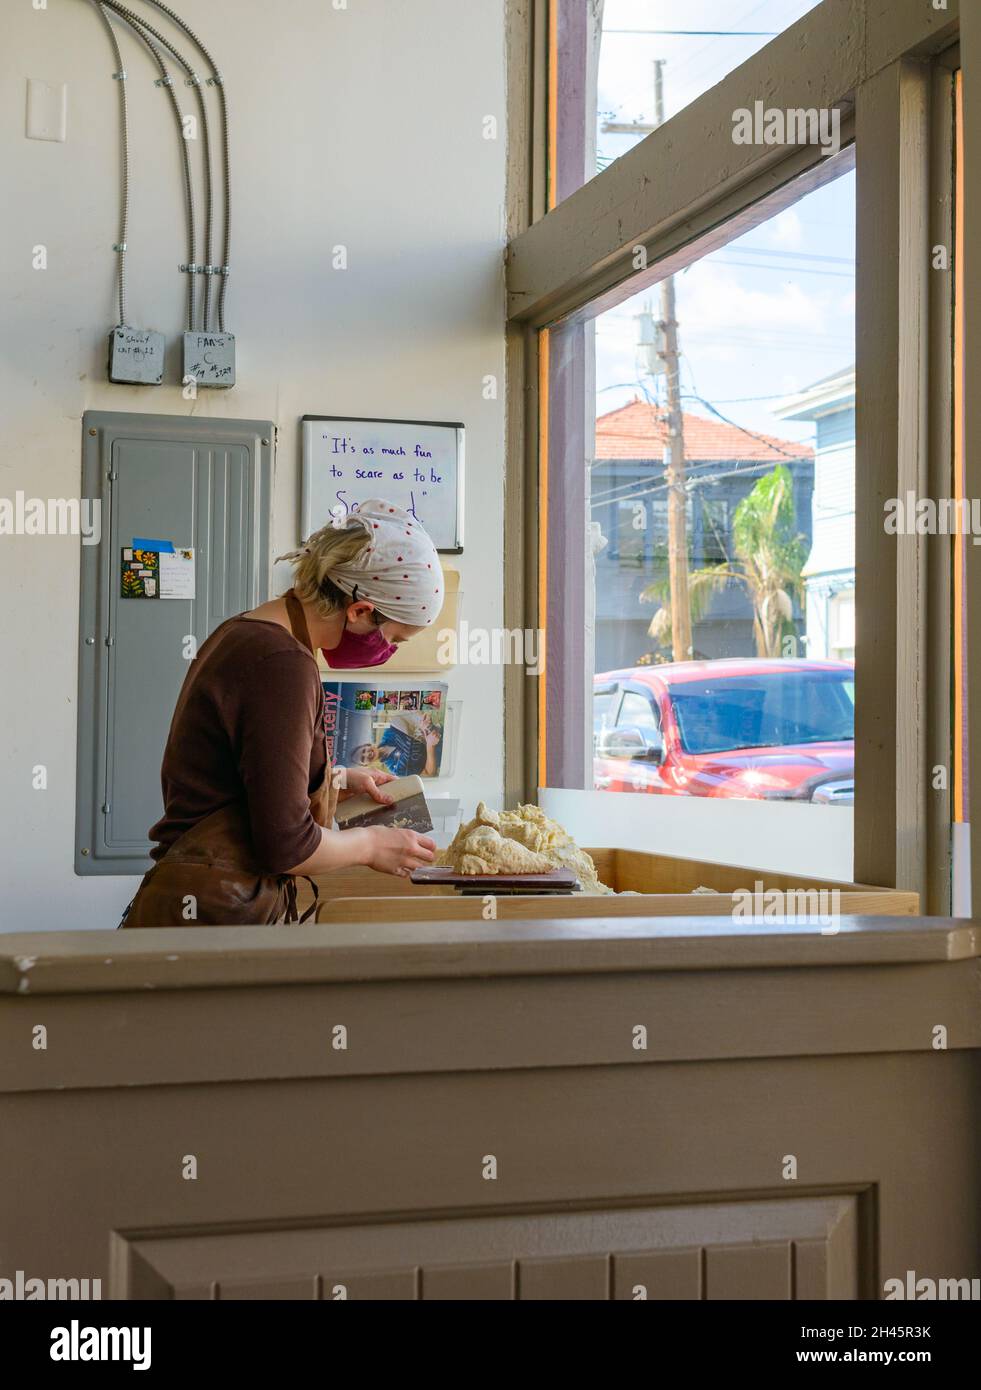 NEW ORLEANS, LA, USA - OCTOBER 29, 2021: Baker cutting dough to make pie crust at Windowsill Pies on Freret Street Stock Photo